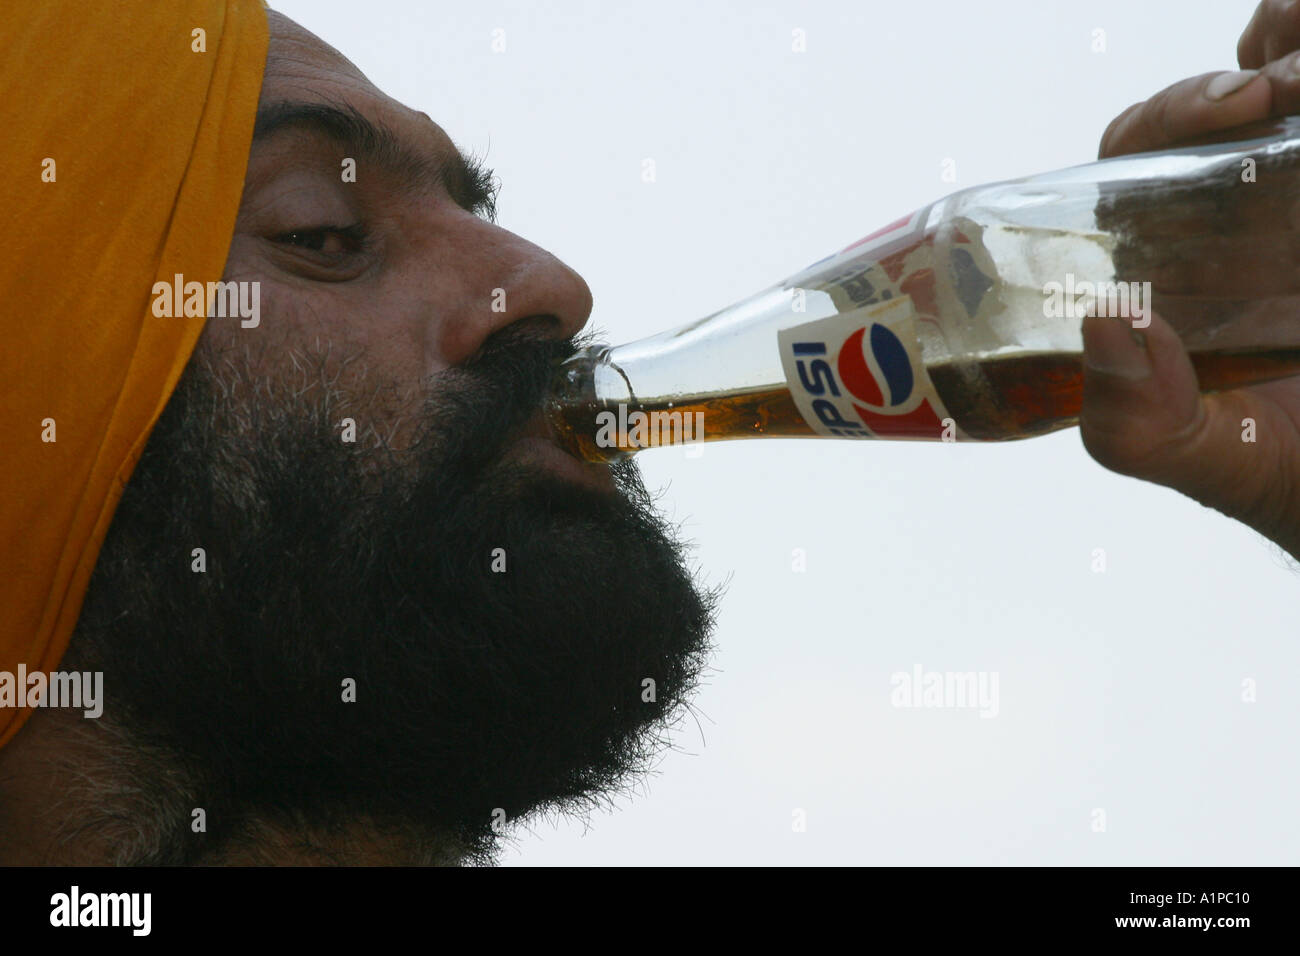 A Sikh man wearing a turban drinks from a persi cola bottle in New Delhi in India Stock Photo